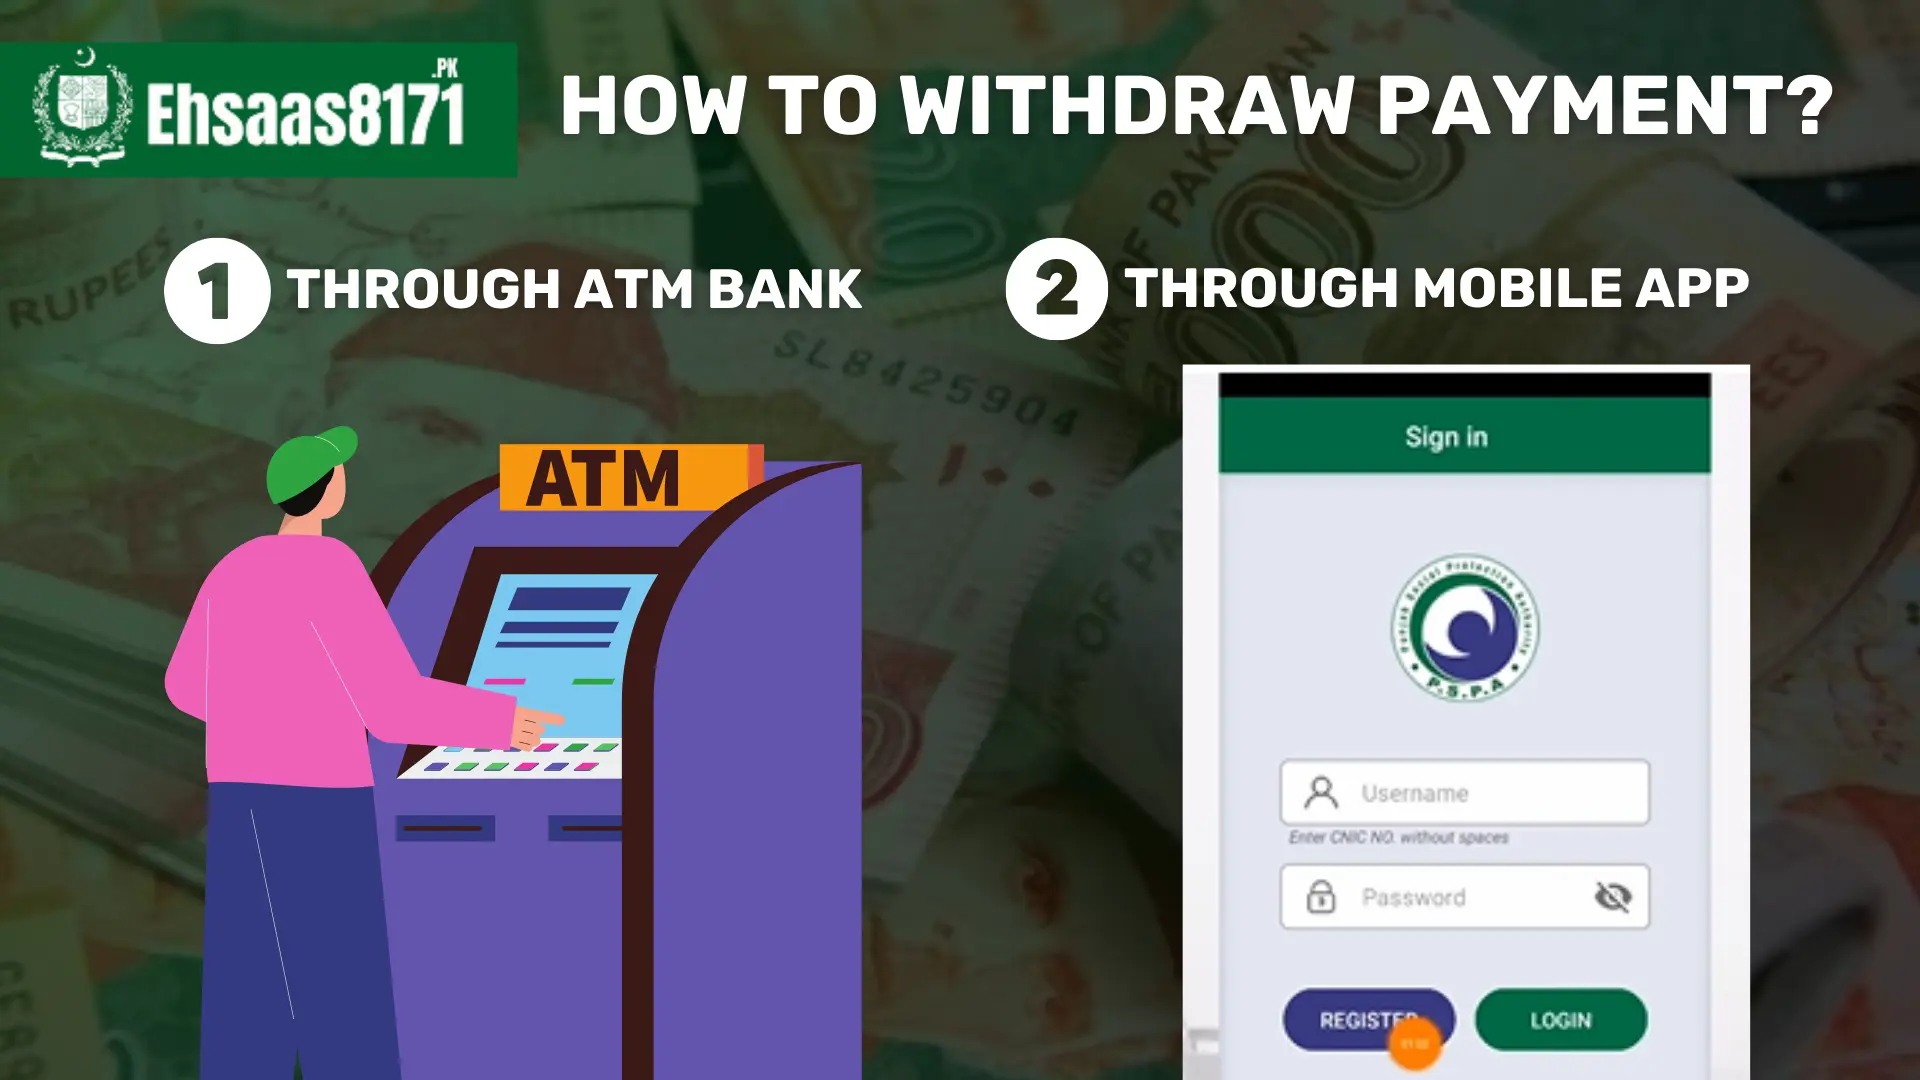 How to Withdraw Payment?